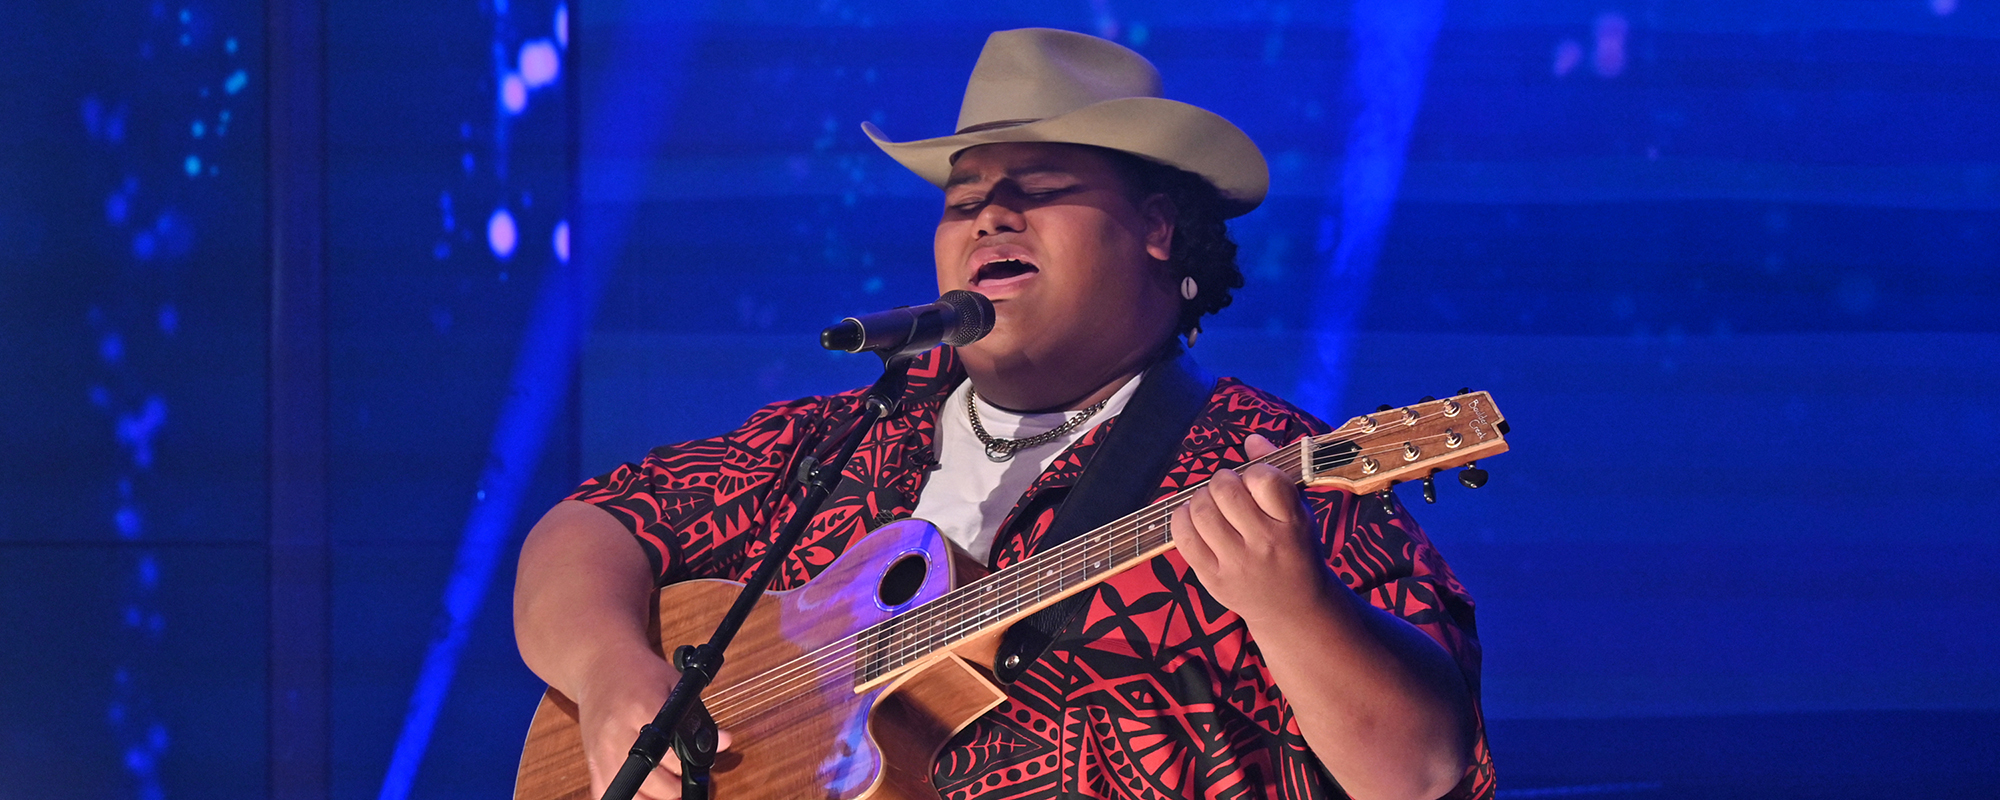 ‘American Idol’ Winner Iam Tongi Opens Up About His Father’s Impact and Wanting to “Represent My People” in Music